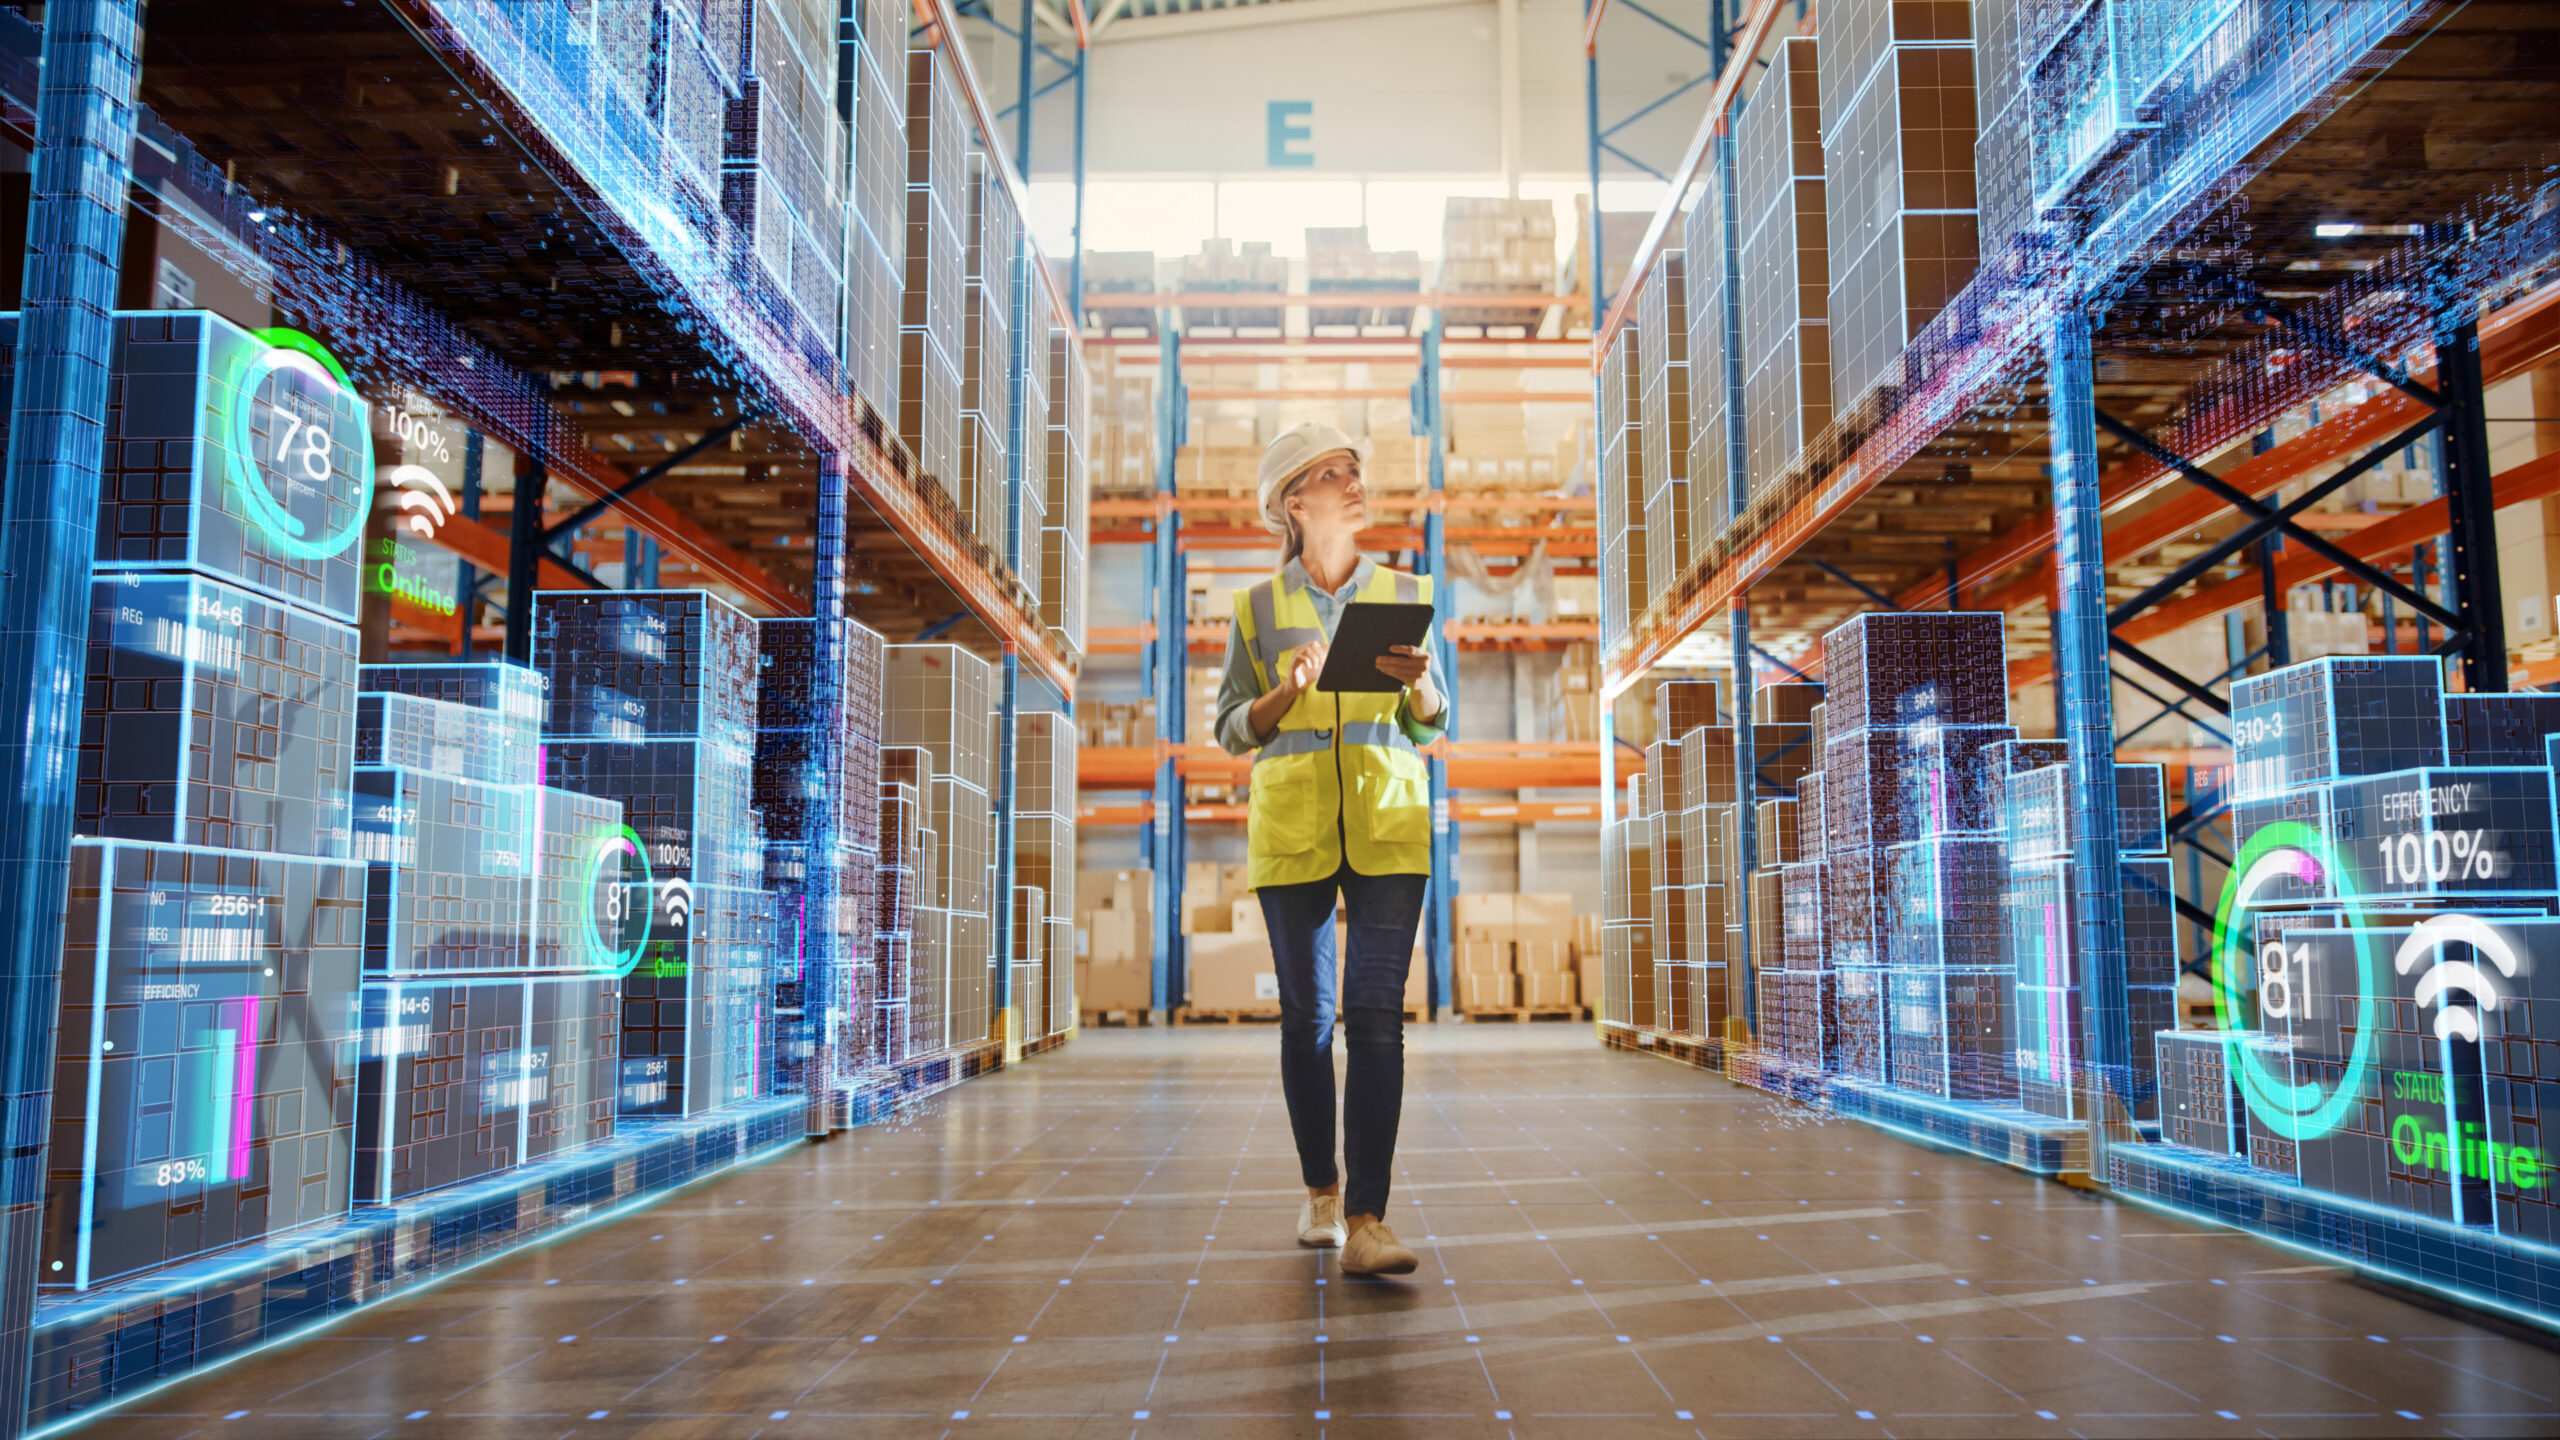 Futuristic Technology Retail Warehouse: Worker Doing Inventory